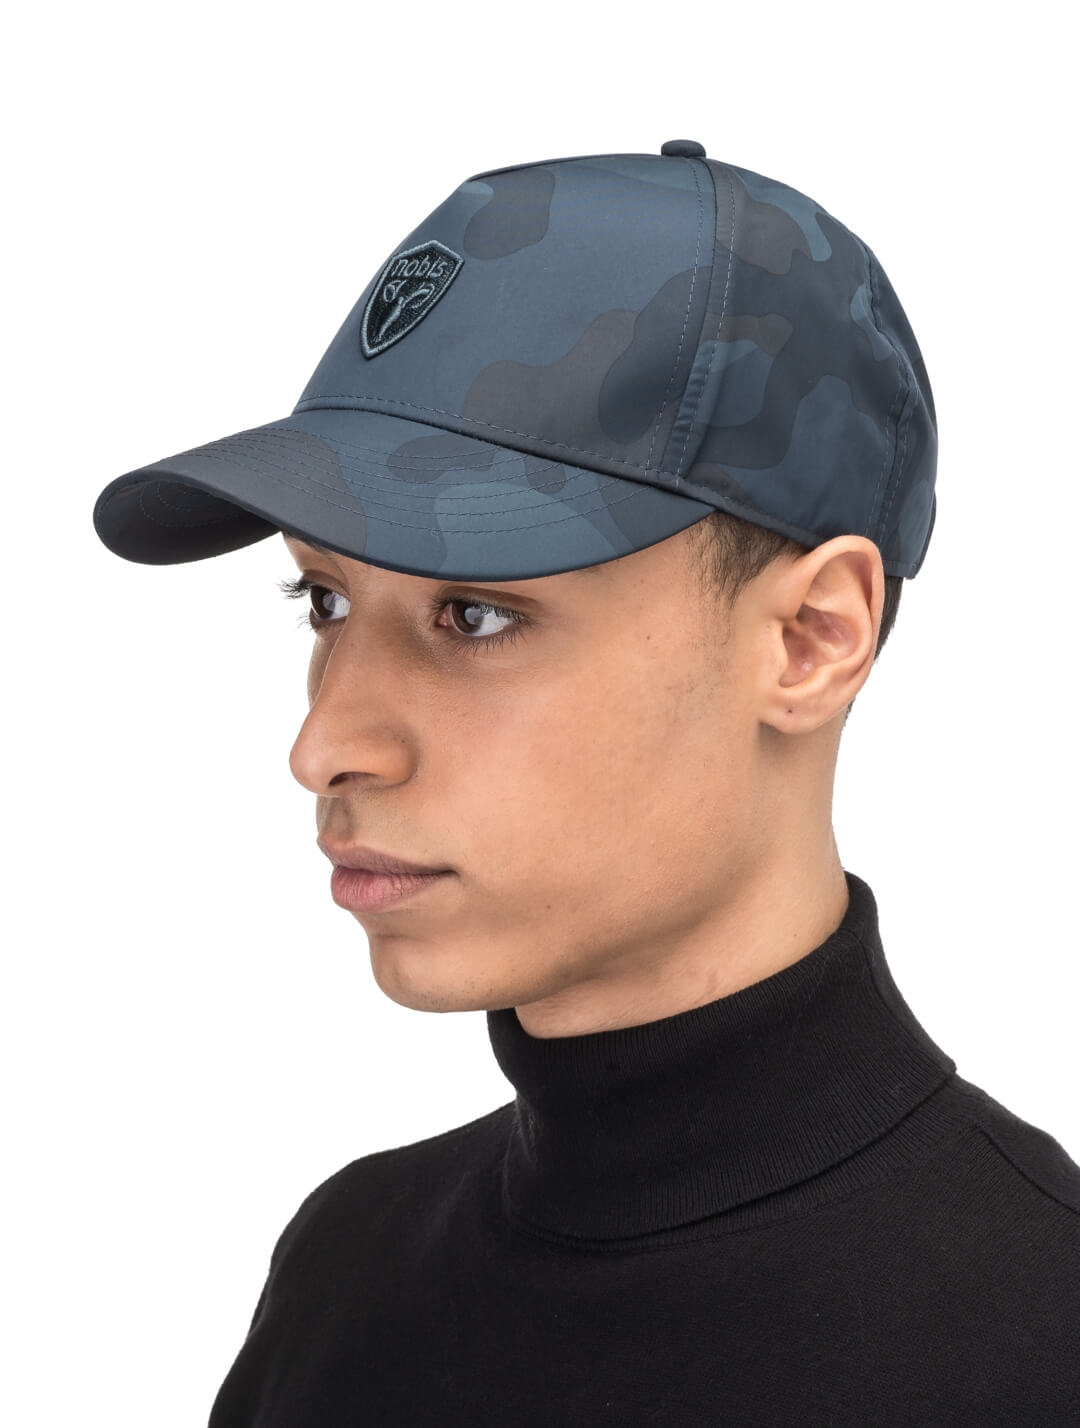 Satine Adjustable Cap in 5-panel construction, mid height crown, curved peak brim, and adjustable strap closure, in Navy Camo